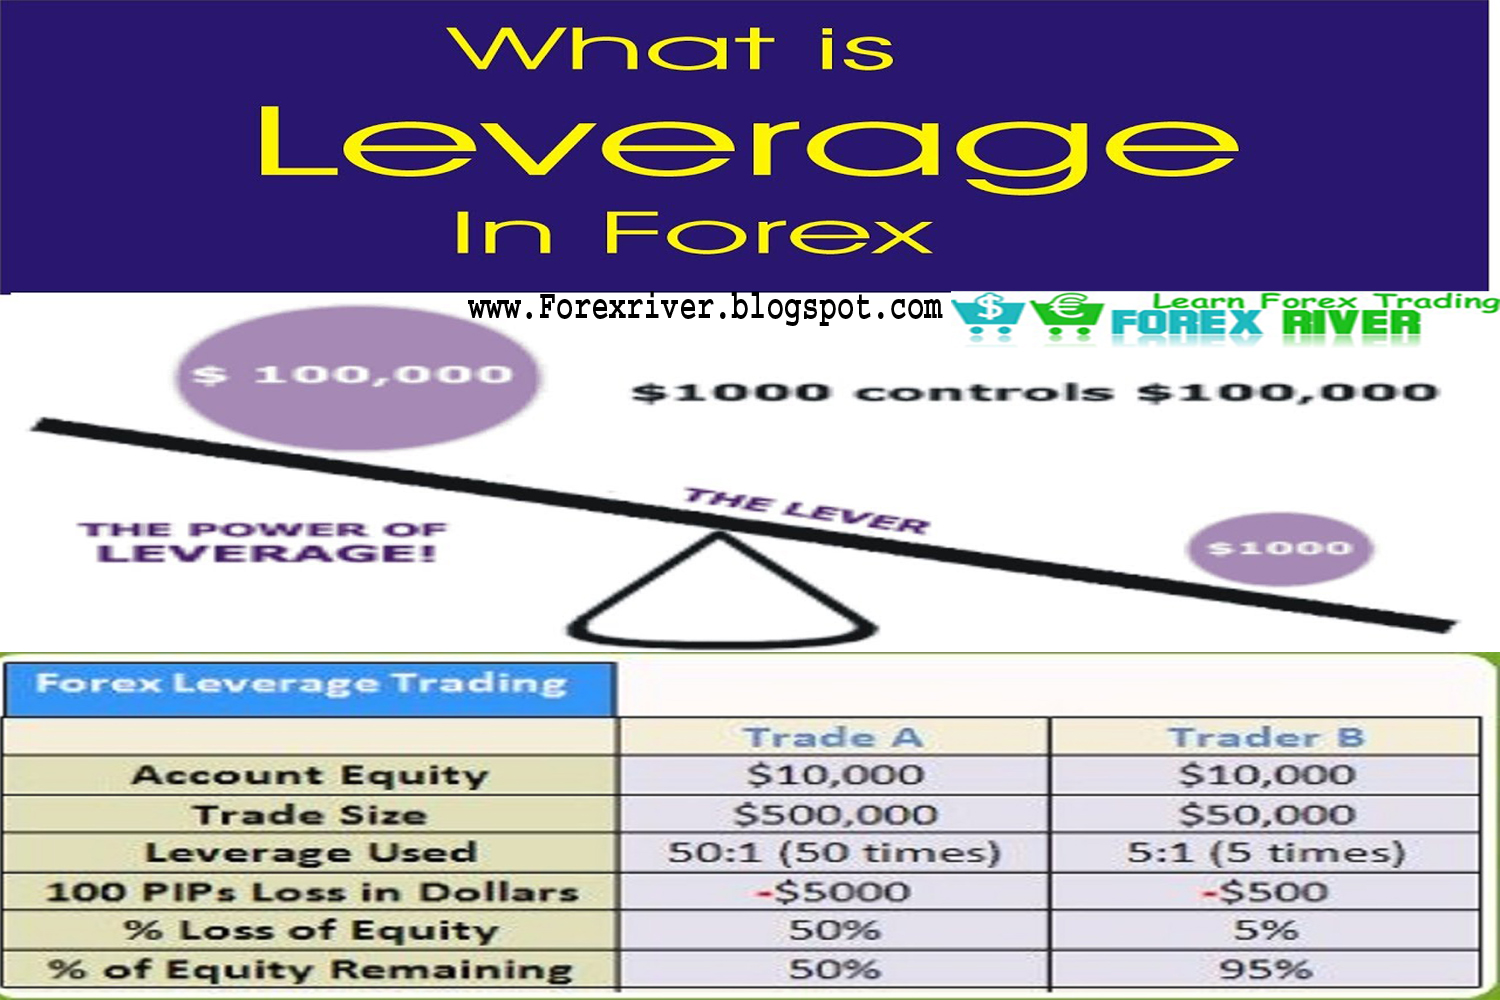 3. A Comprehensive Guide to Leverage in the Forex Market